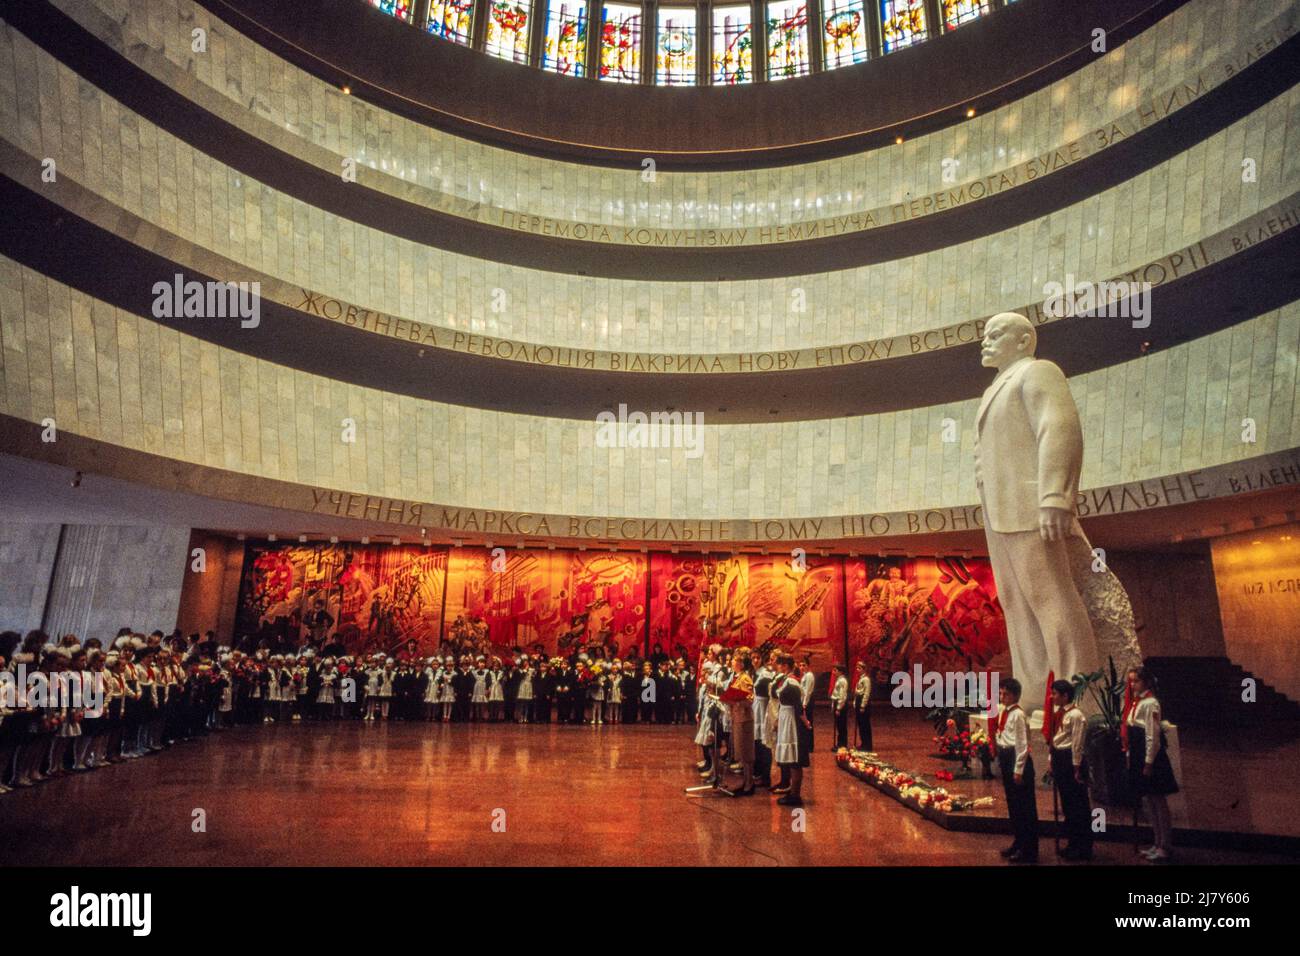 Schools conduct ceremonies at the statue of Lenin in the Lenin Museum in Kiev, Ukraine, in the days before Revolution day on 7th Nov 1989. Stock Photo